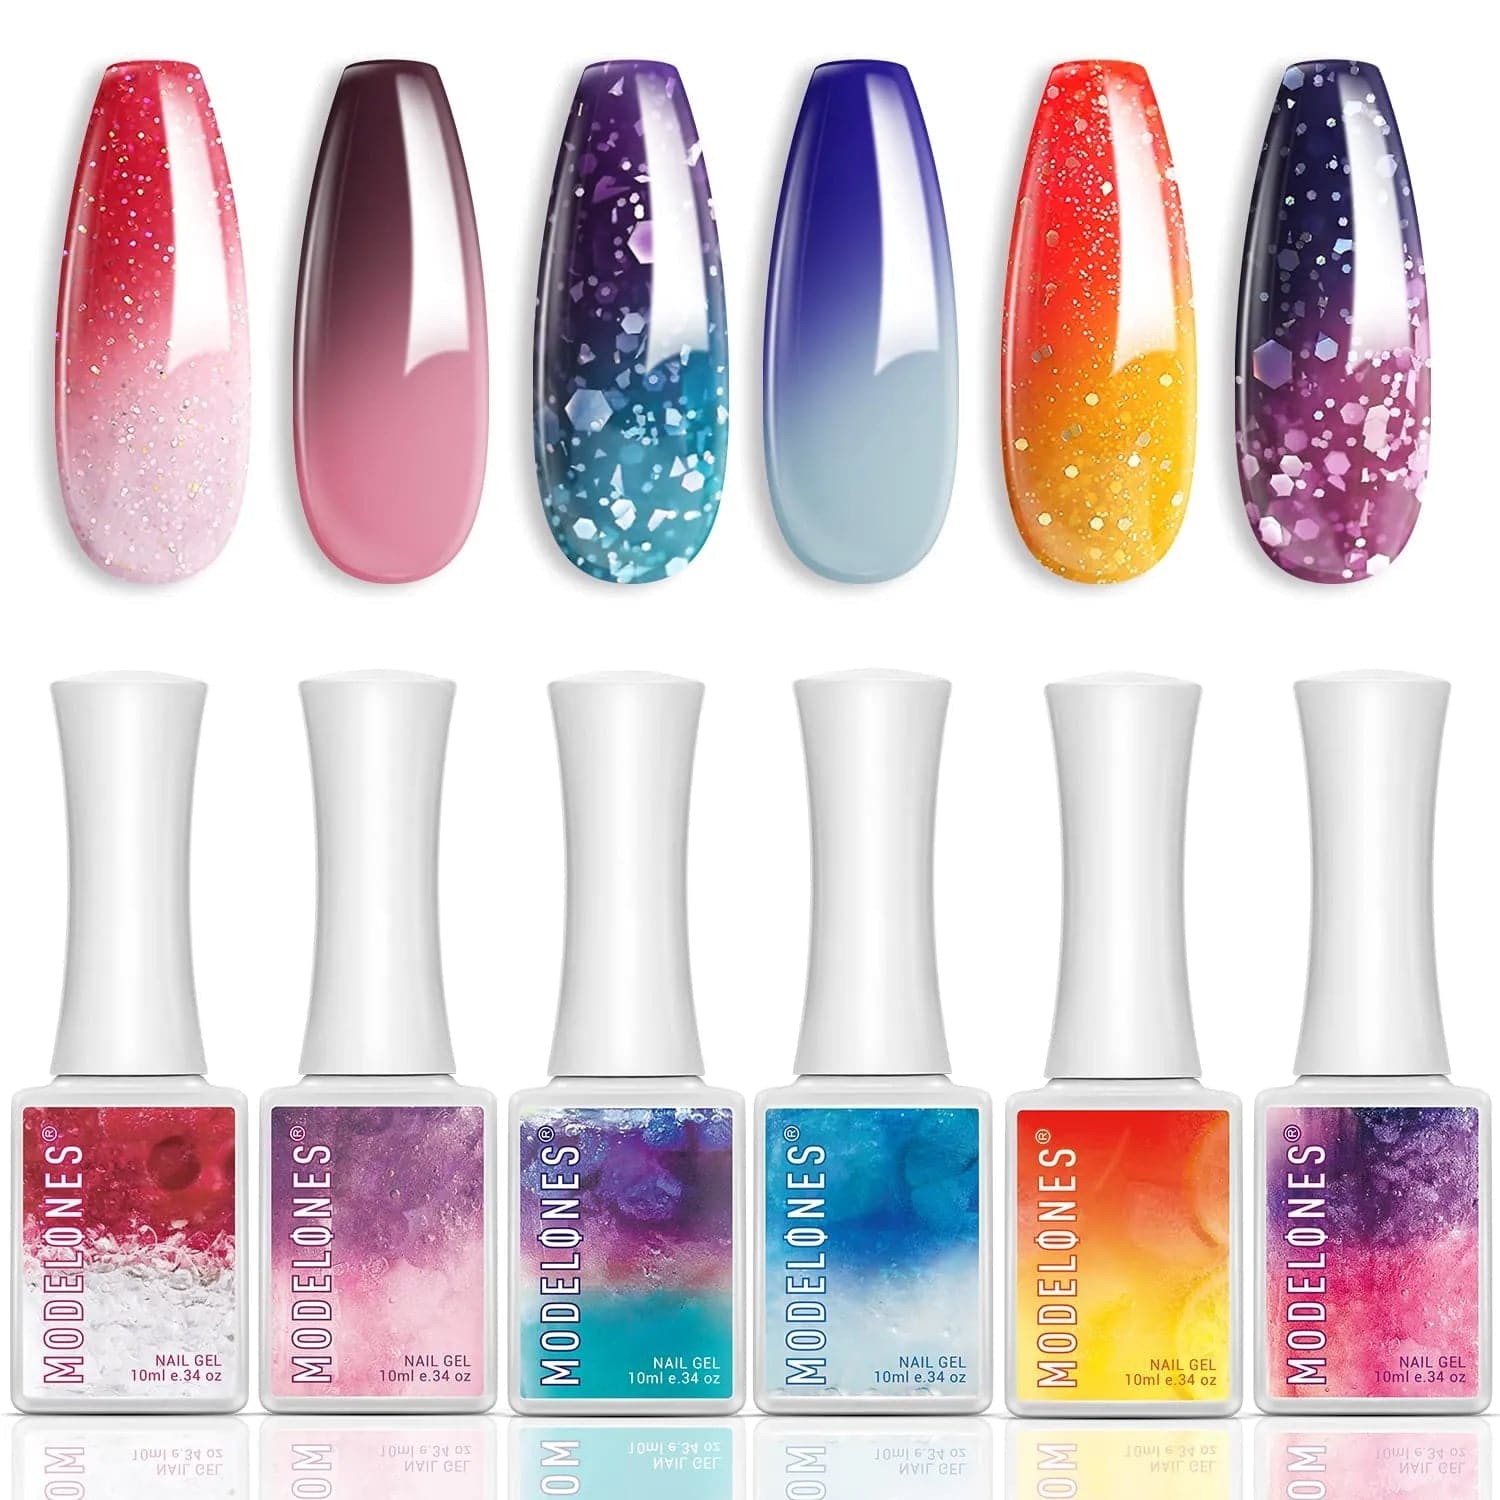 Buy Makeup Mania Nail Polish Set of 12 Online at Lowest Price in India -  JustWao.com